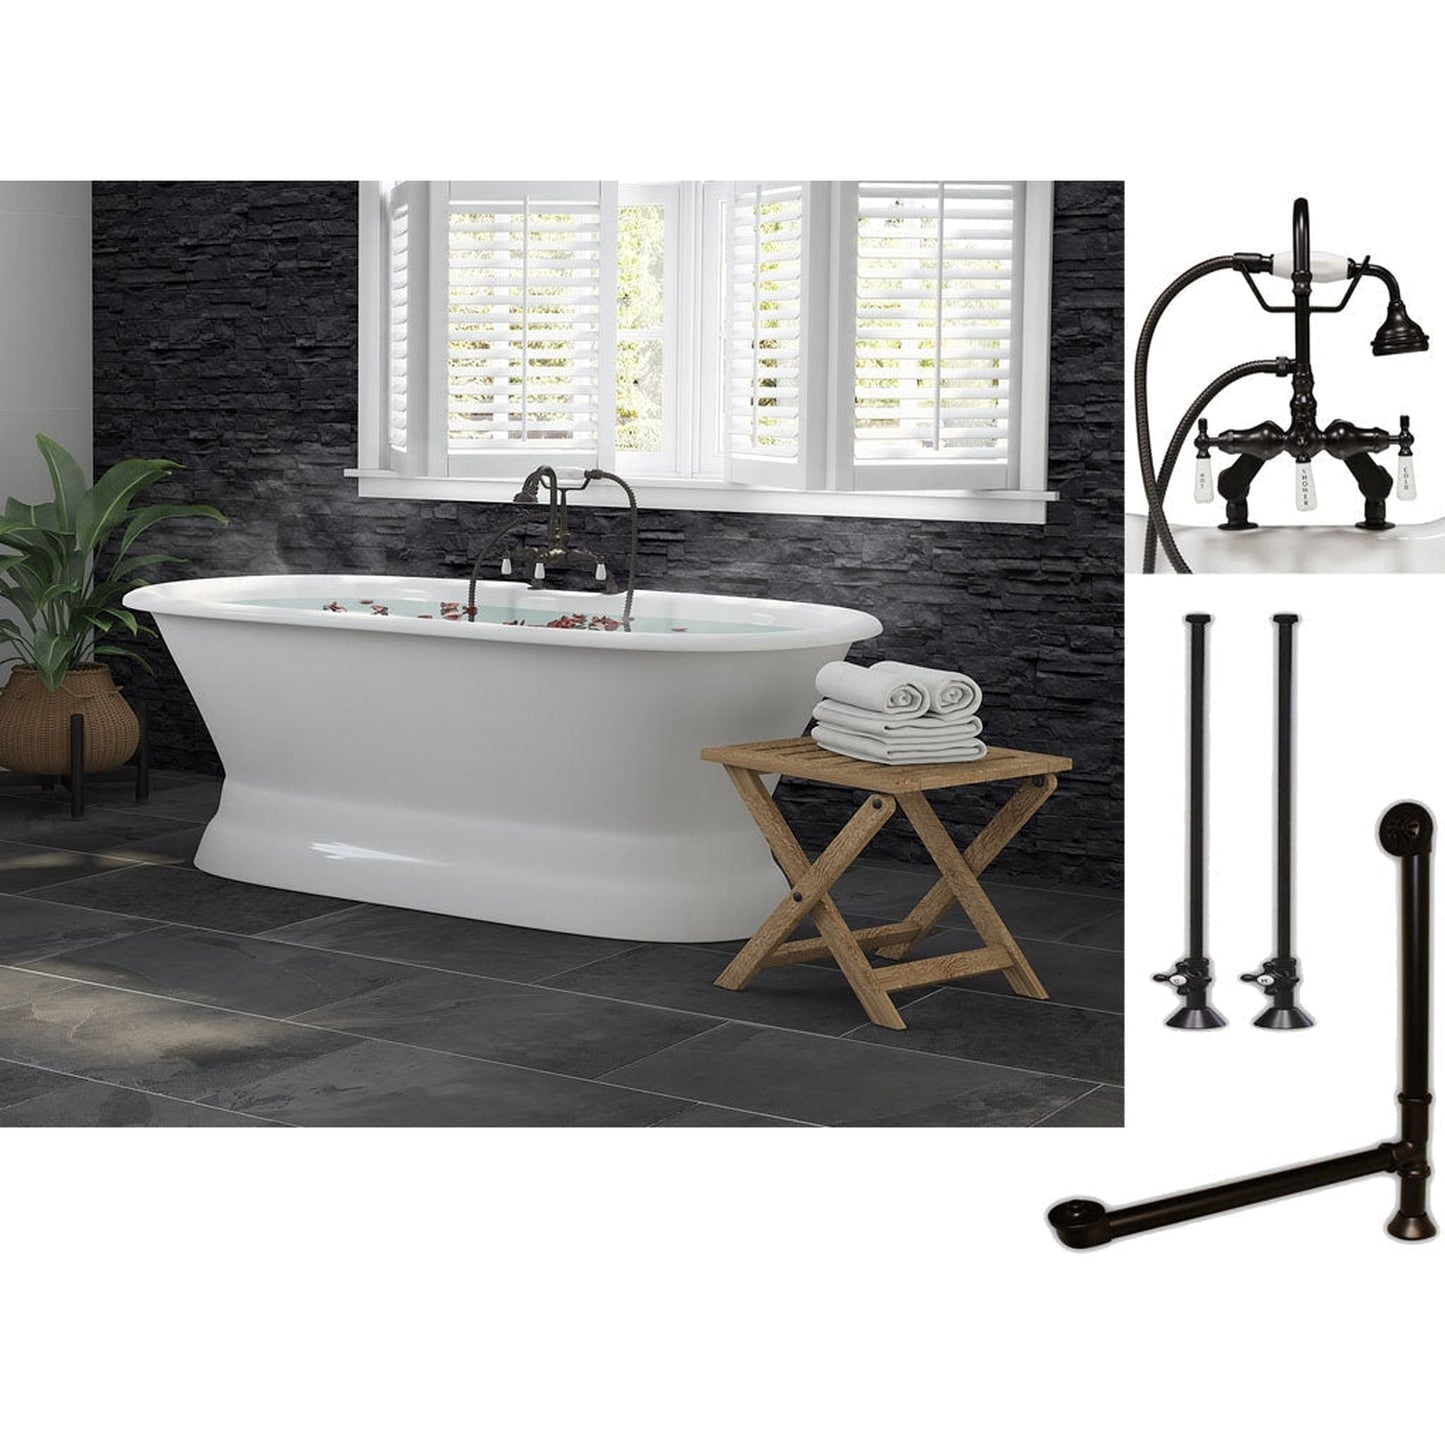 Cambridge Plumbing 66" White Cast Iron Double Ended Pedestal Bathtub With Deck Holes And Complete Plumbing Package Including Porcelain Lever English Telephone Brass Faucet, Supply Lines, Drain And Overflow Assembly In Oil Rubbed Bronze